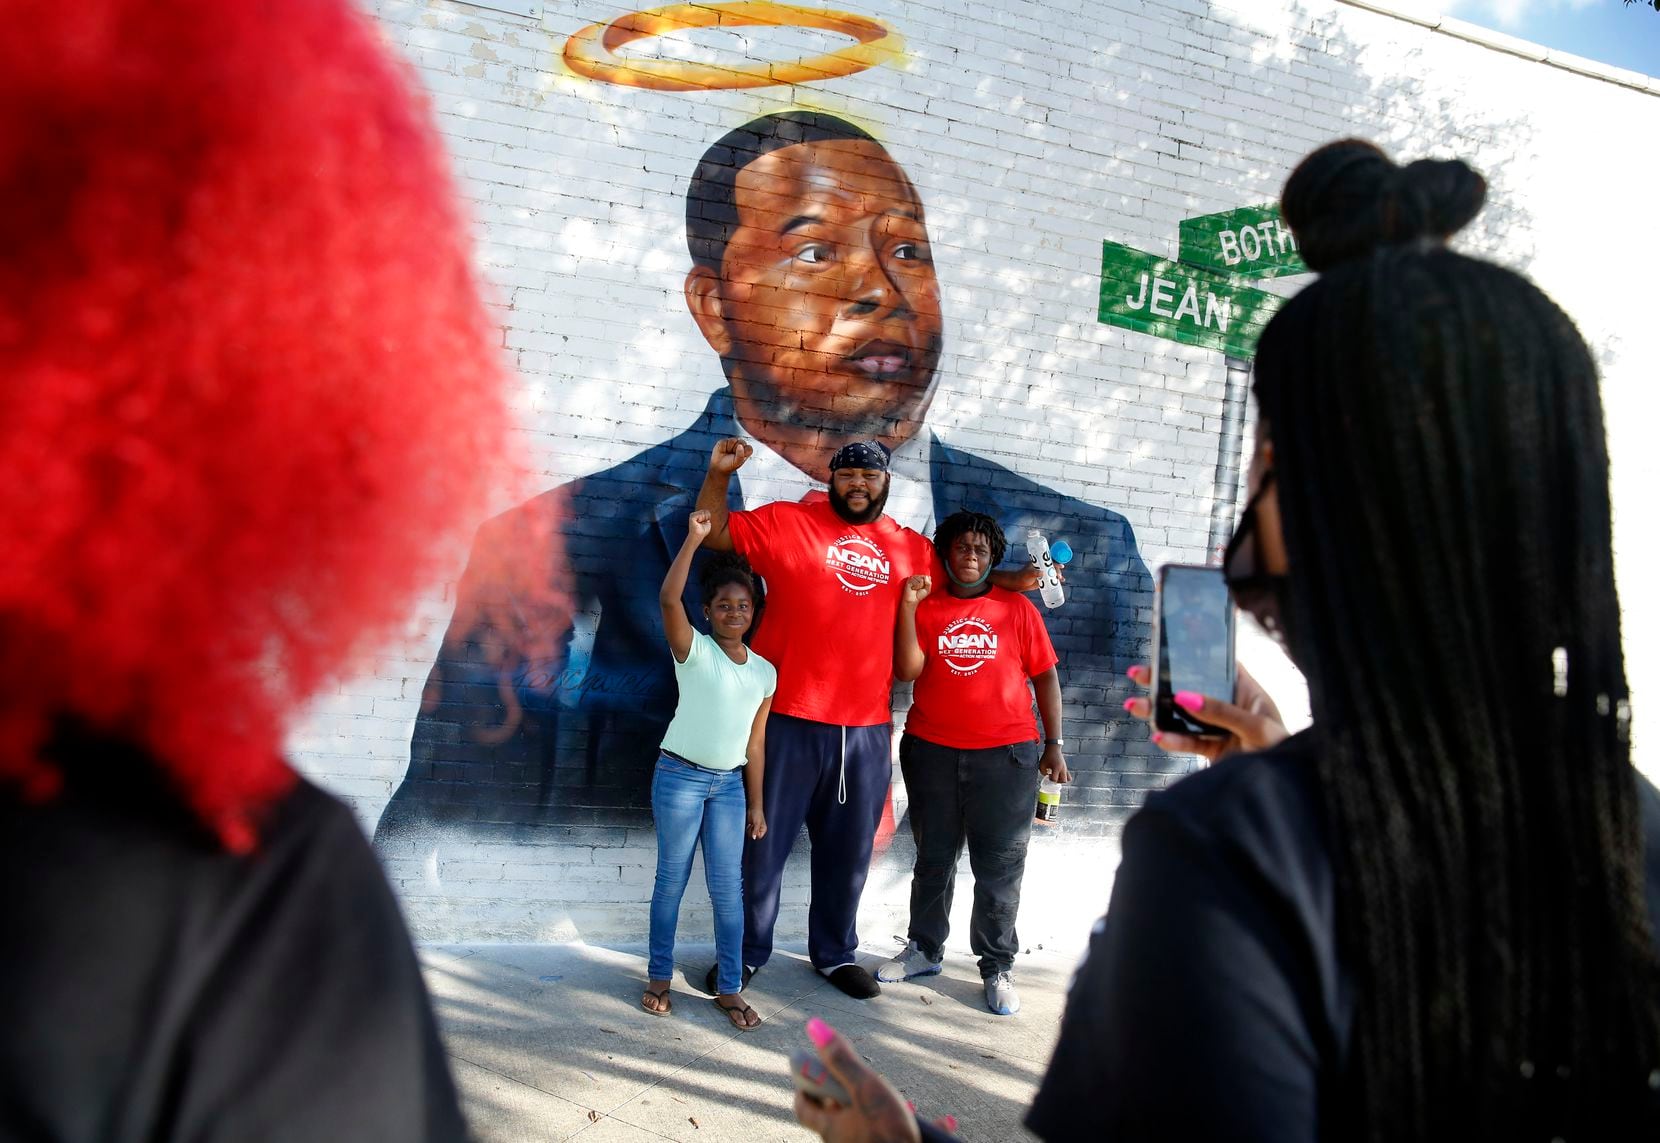 In front of a new painted mural of Botham Jean, Frisco Jackson of Dallas posed for a photo with his son Leo and daughter Aireyin before a memorial gathering on South Lamar at Cadiz Street near downtown Dallas, Sunday, September 6, 2020. Sunday was the second anniversary of Jean's death. Jean was shot and killed in his apartment a few blocks away by former Dallas police officer Amber Guyger. (Tom Fox/The Dallas Morning News)